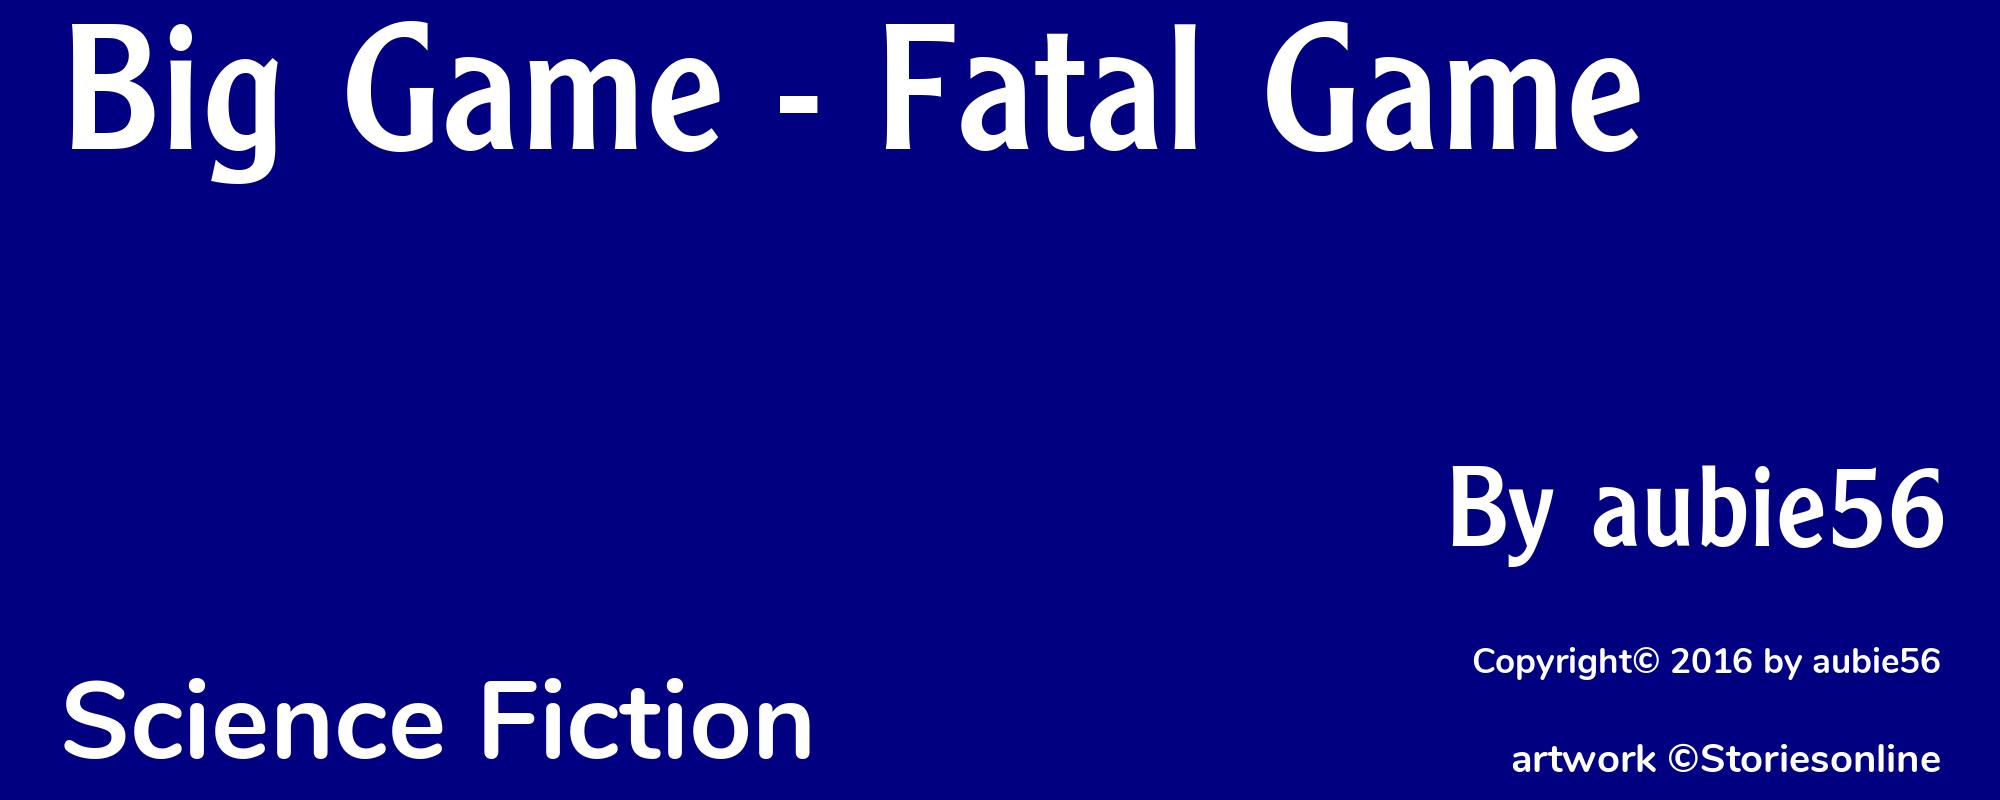 Big Game - Fatal Game - Cover